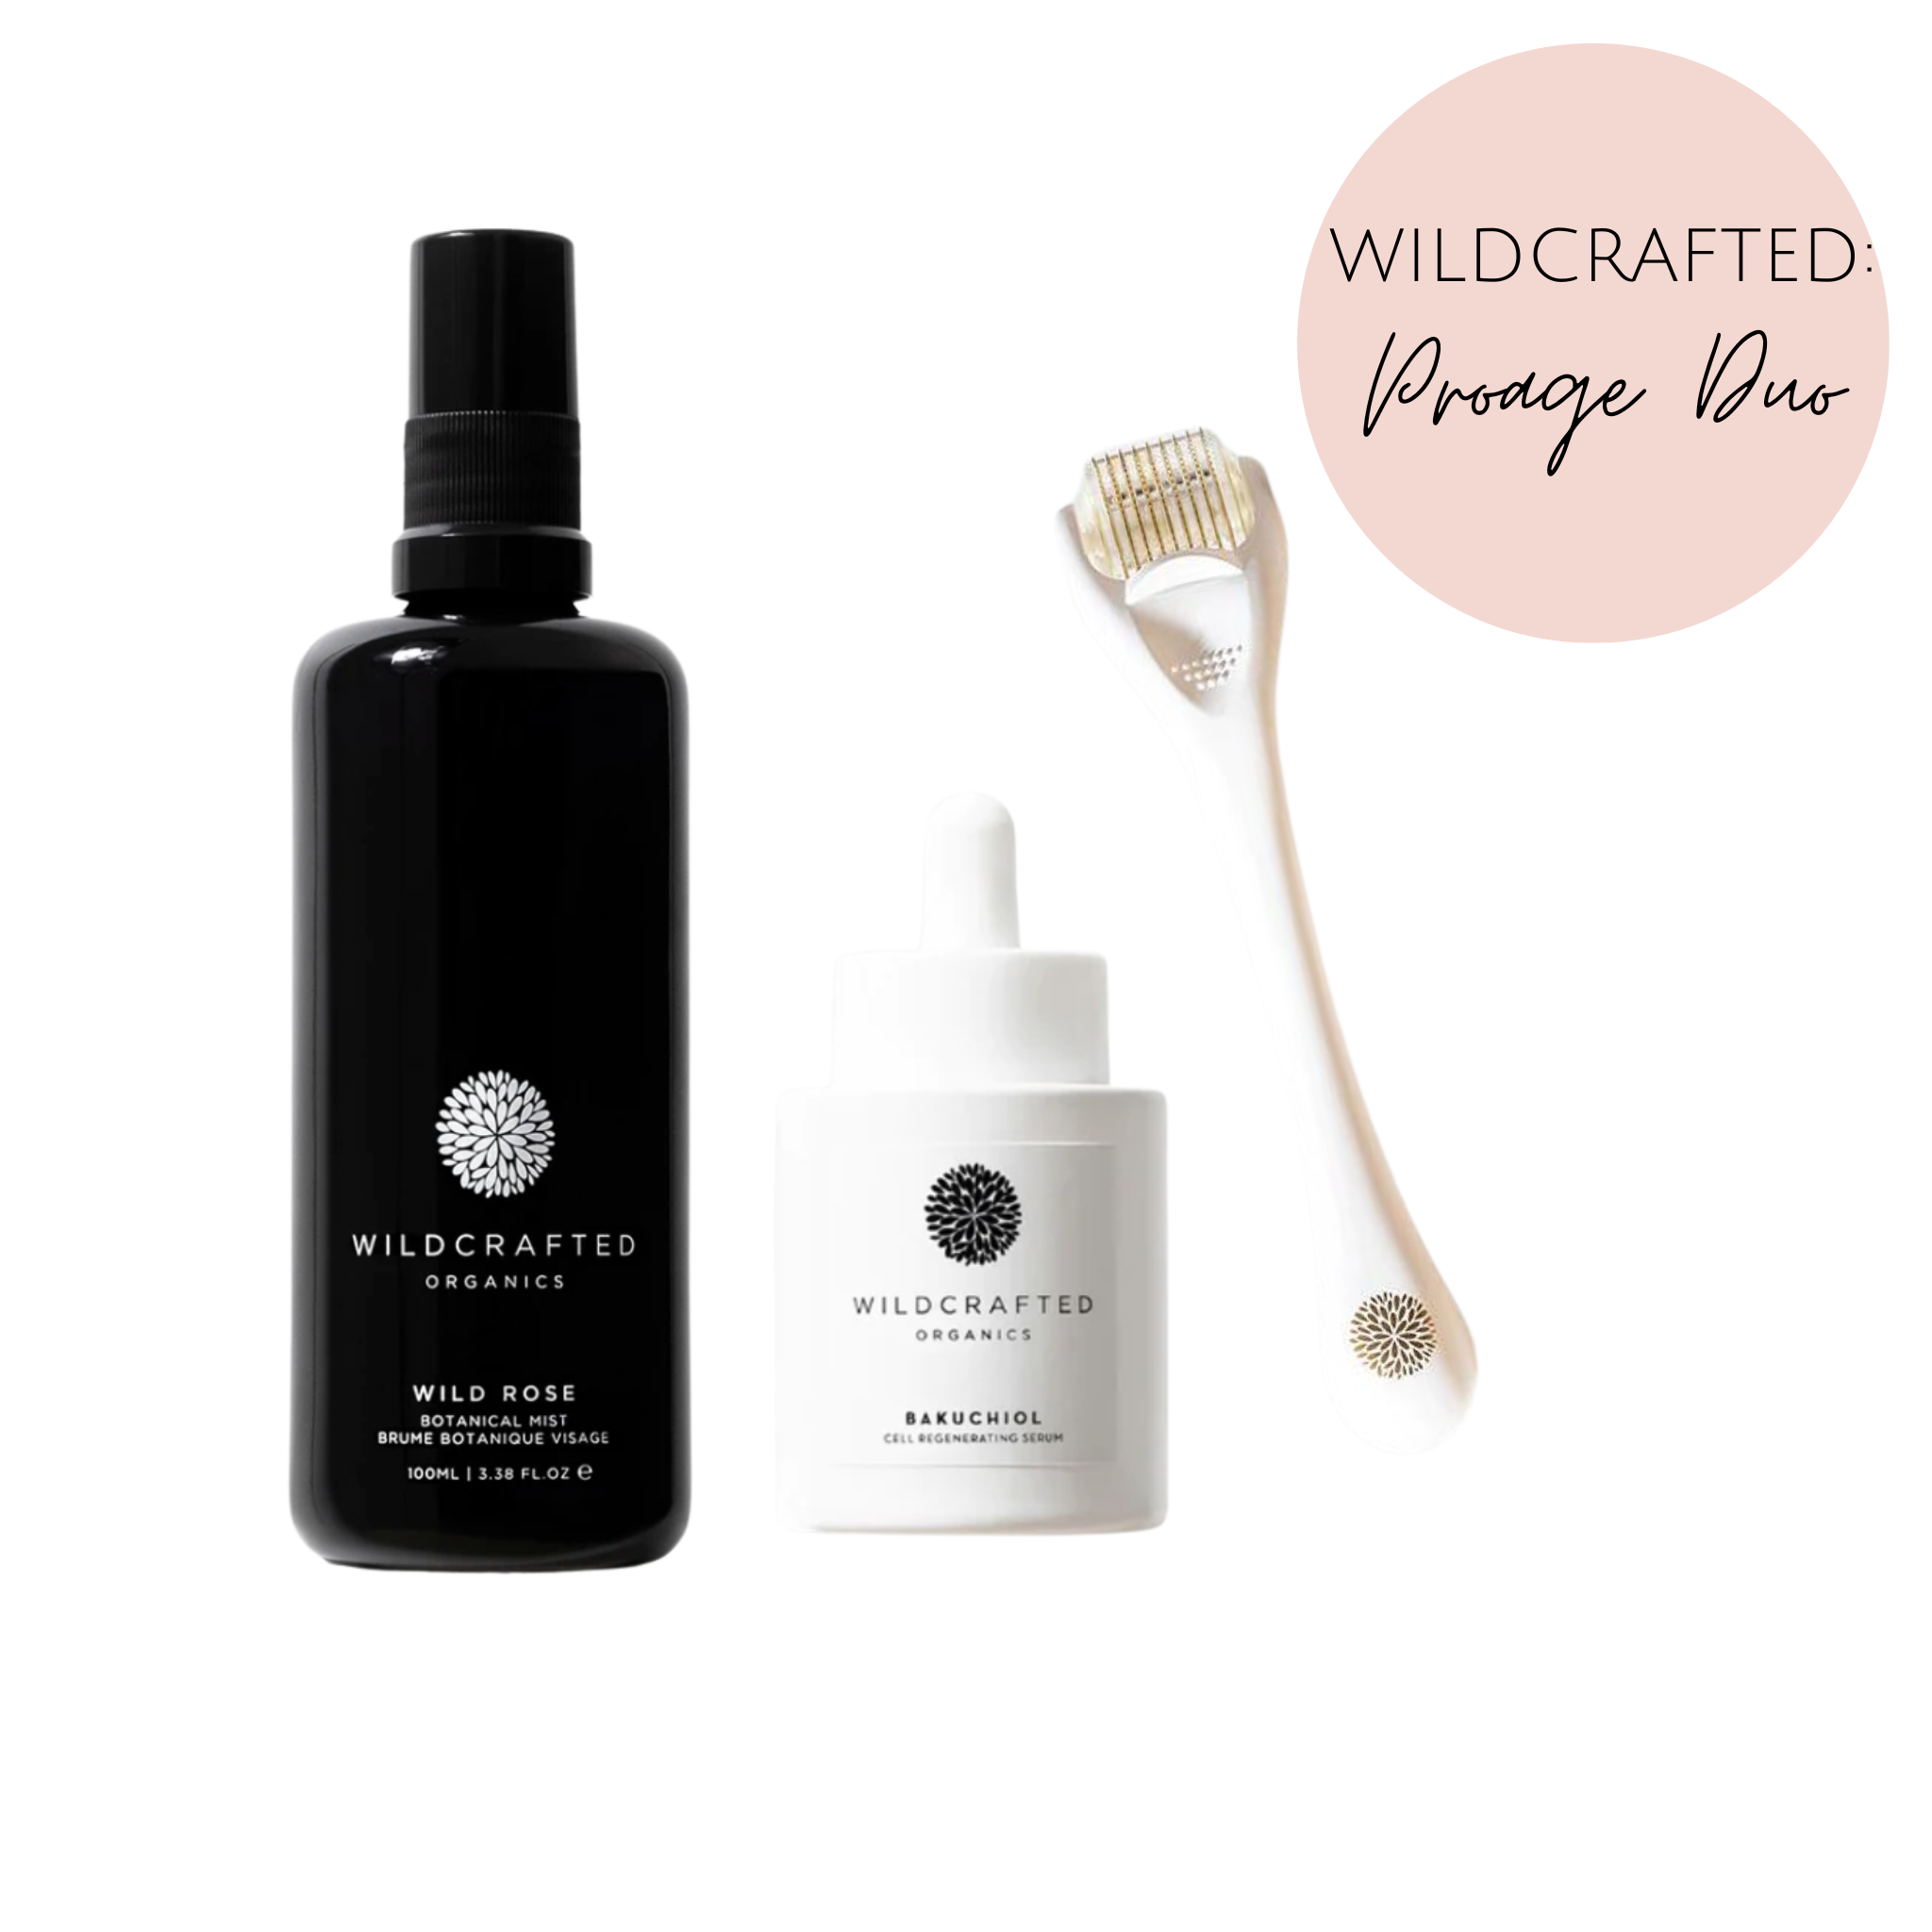 Wildcrafted Organics Pro Age Duo + FREE GIFT